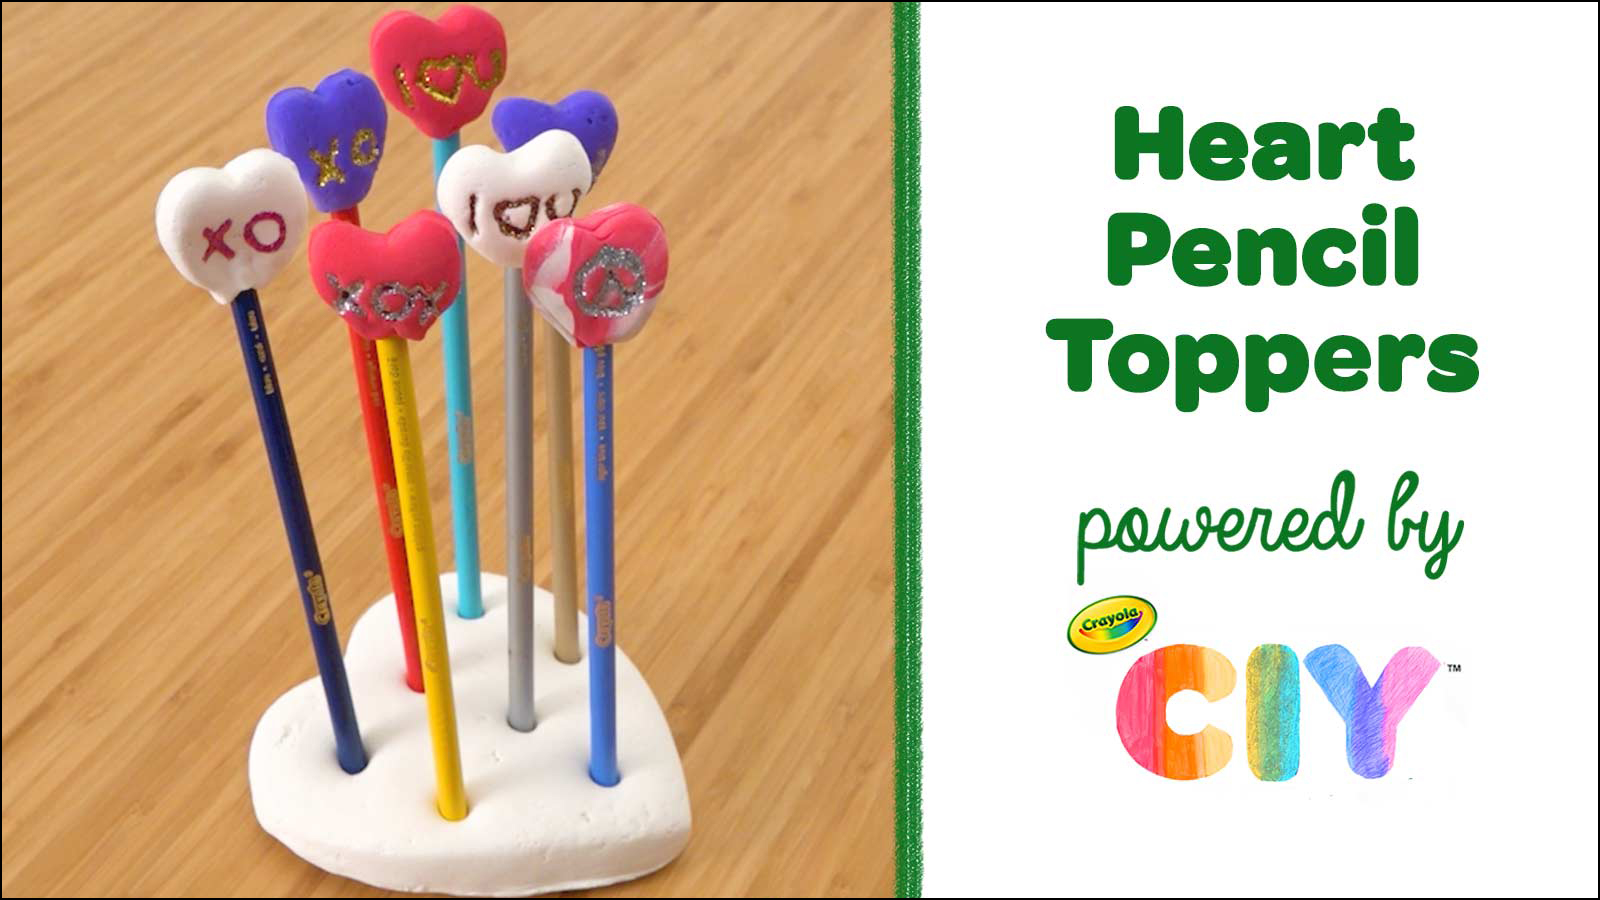 Heart Pencil Toppers CIY Video Poster Frame